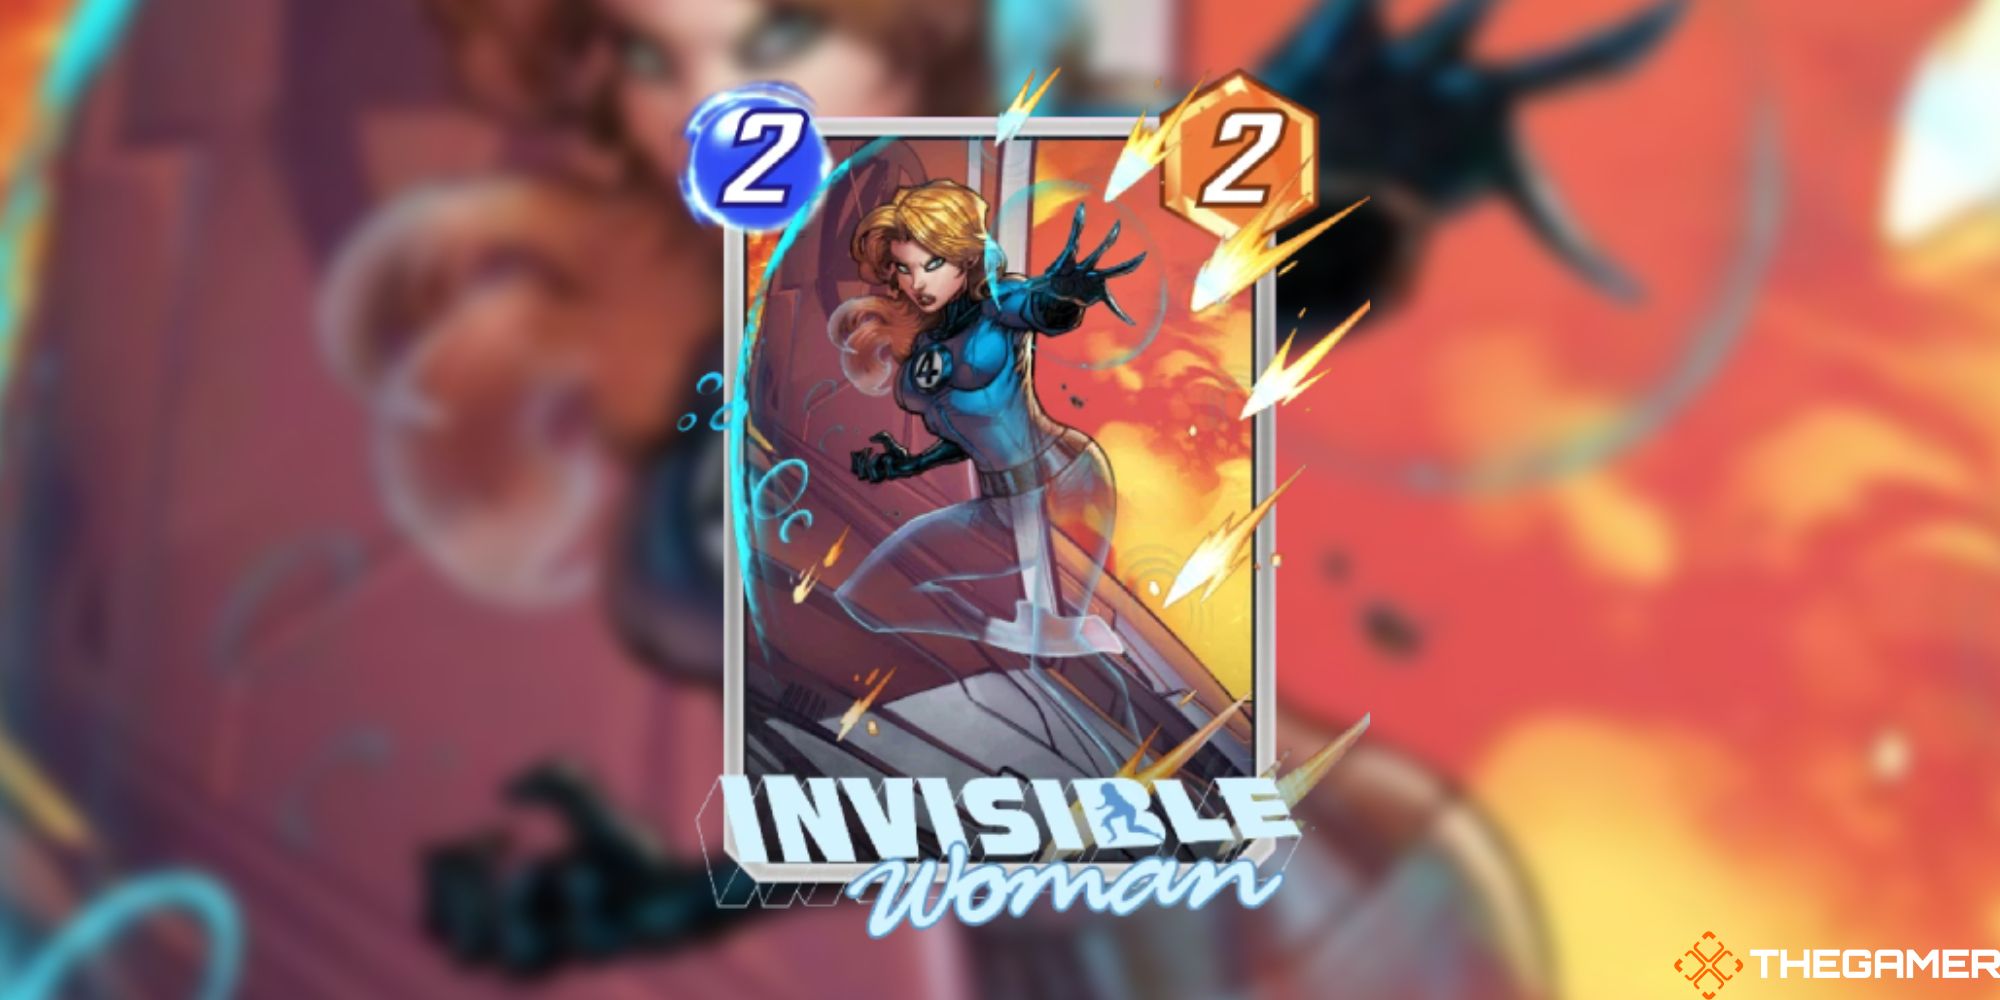 Card art of Invisible Woman by Jonboy Meyers from Marvel Snap